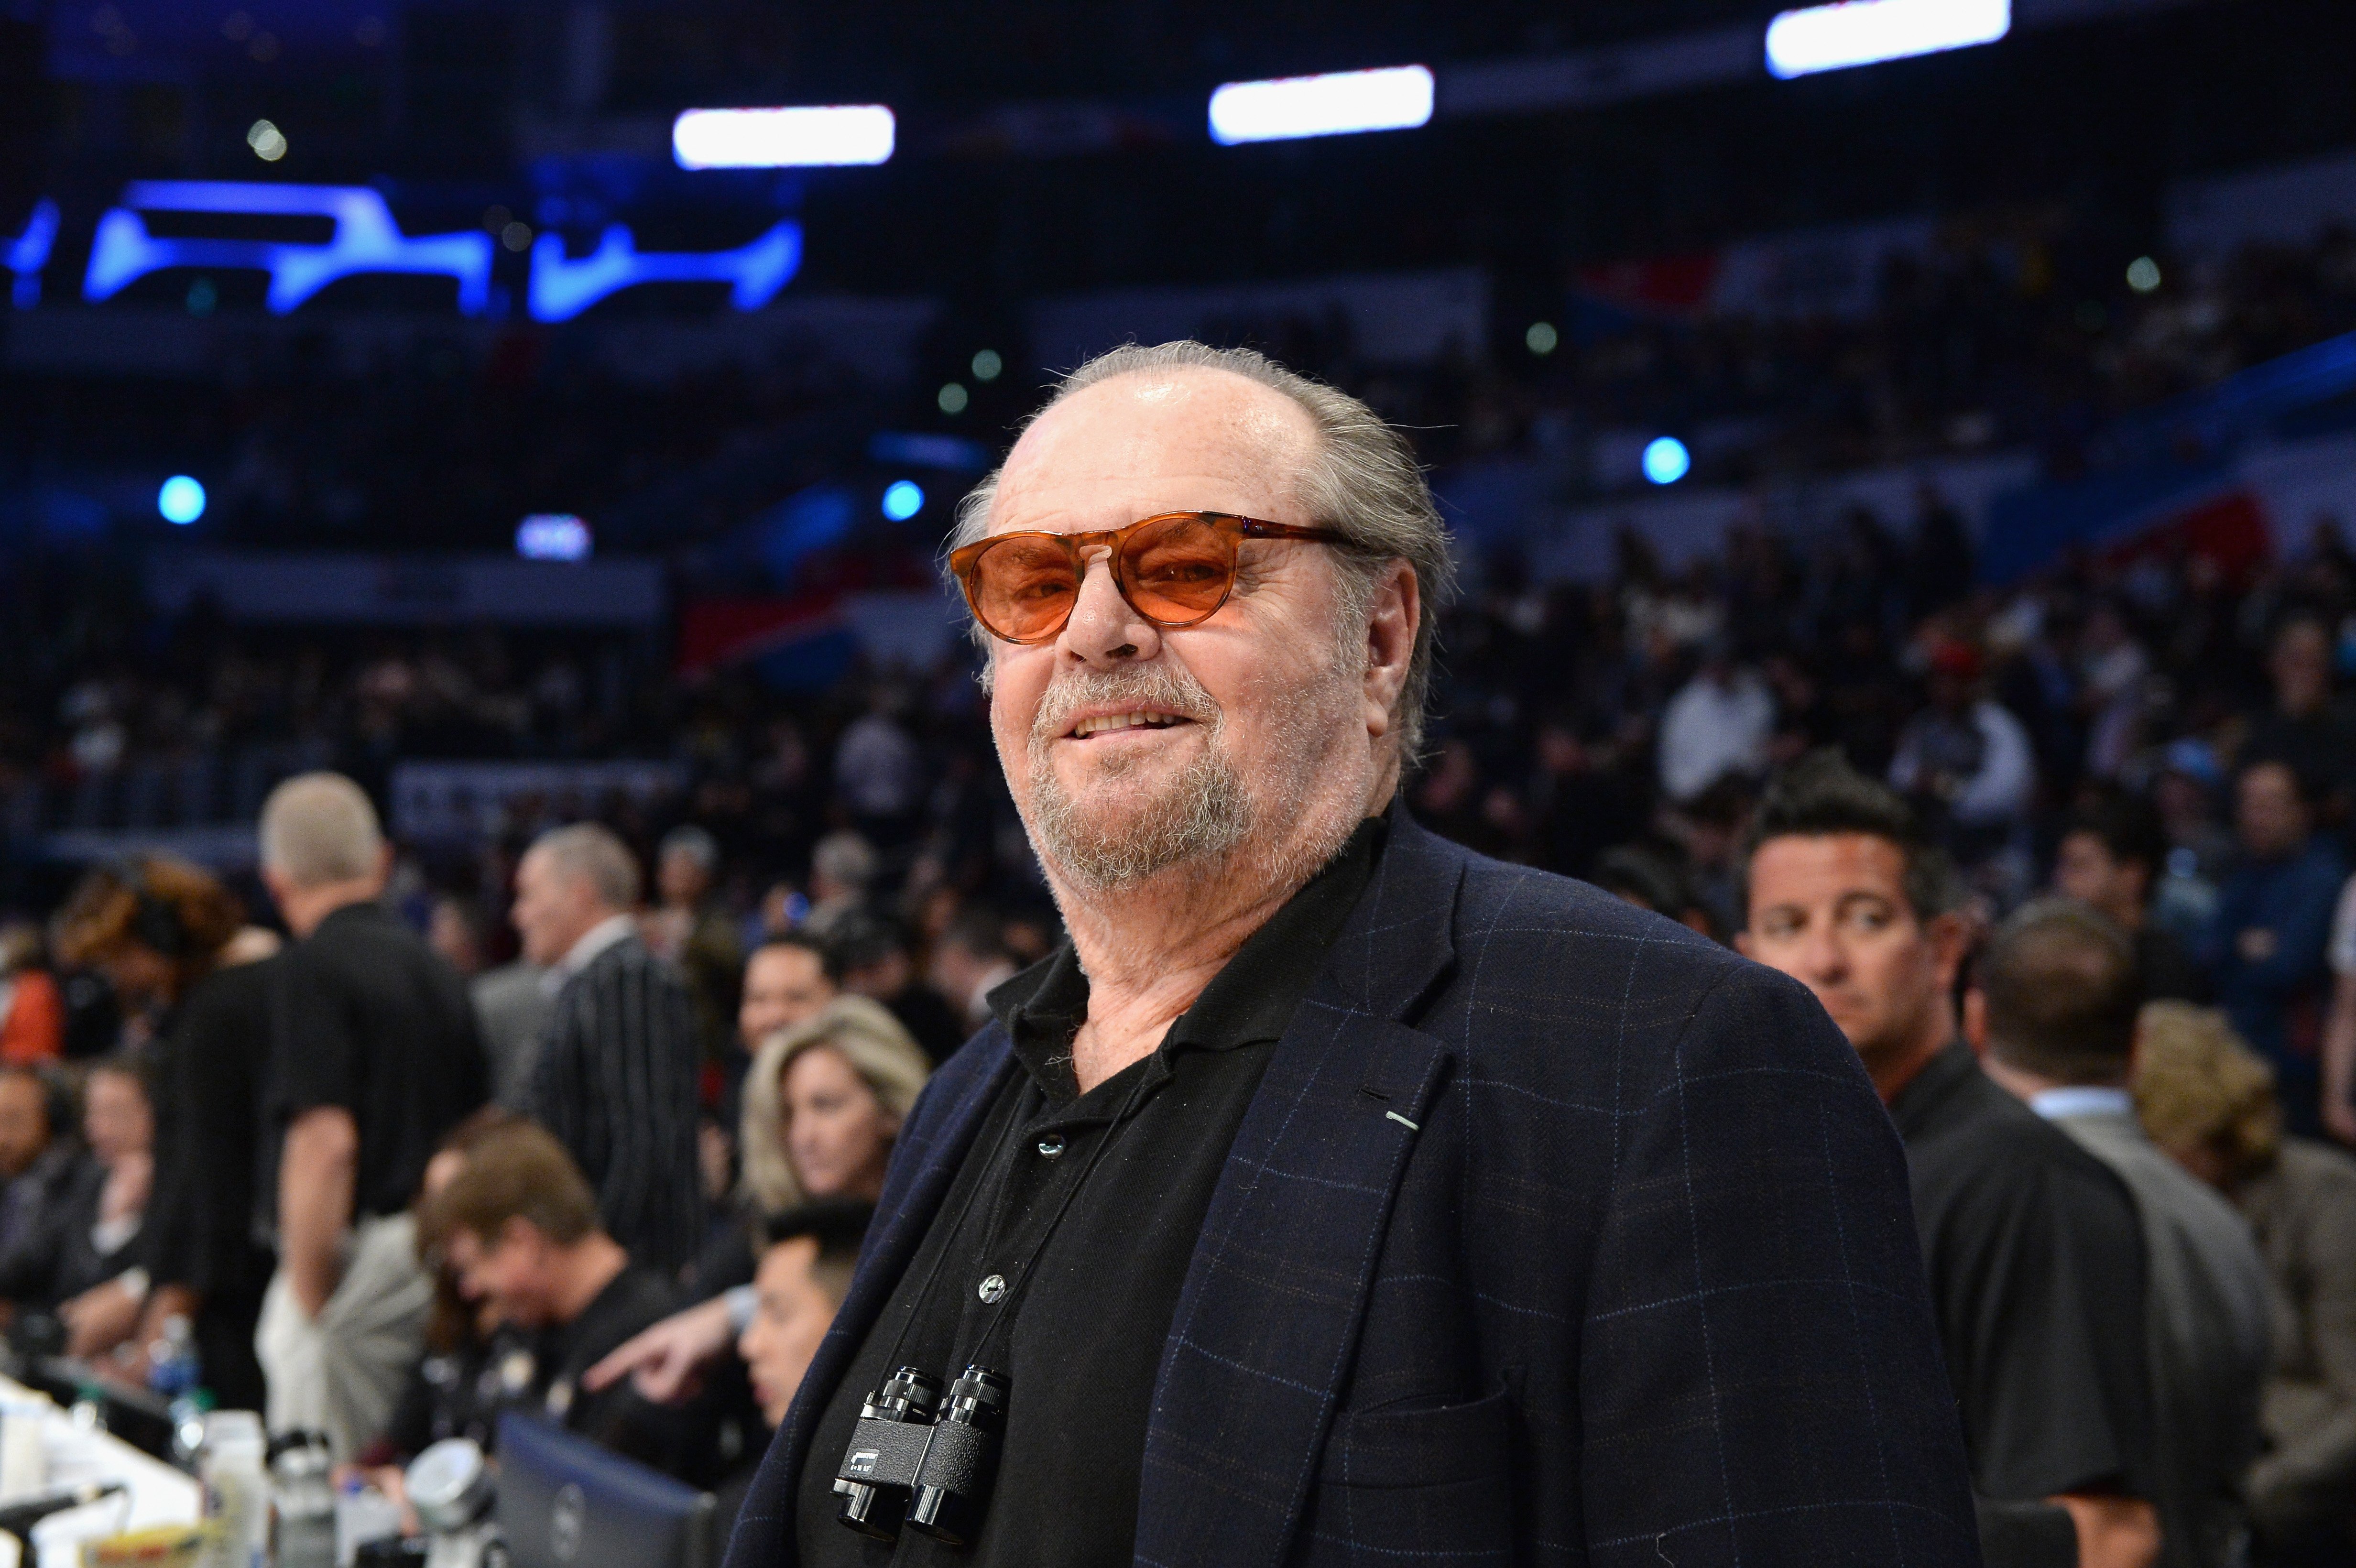 Jack Nicholson attends the NBA All-Star Game 2018 at Staples Center on February 18, 2018, in Los Angeles, California. | Source: Getty Images.